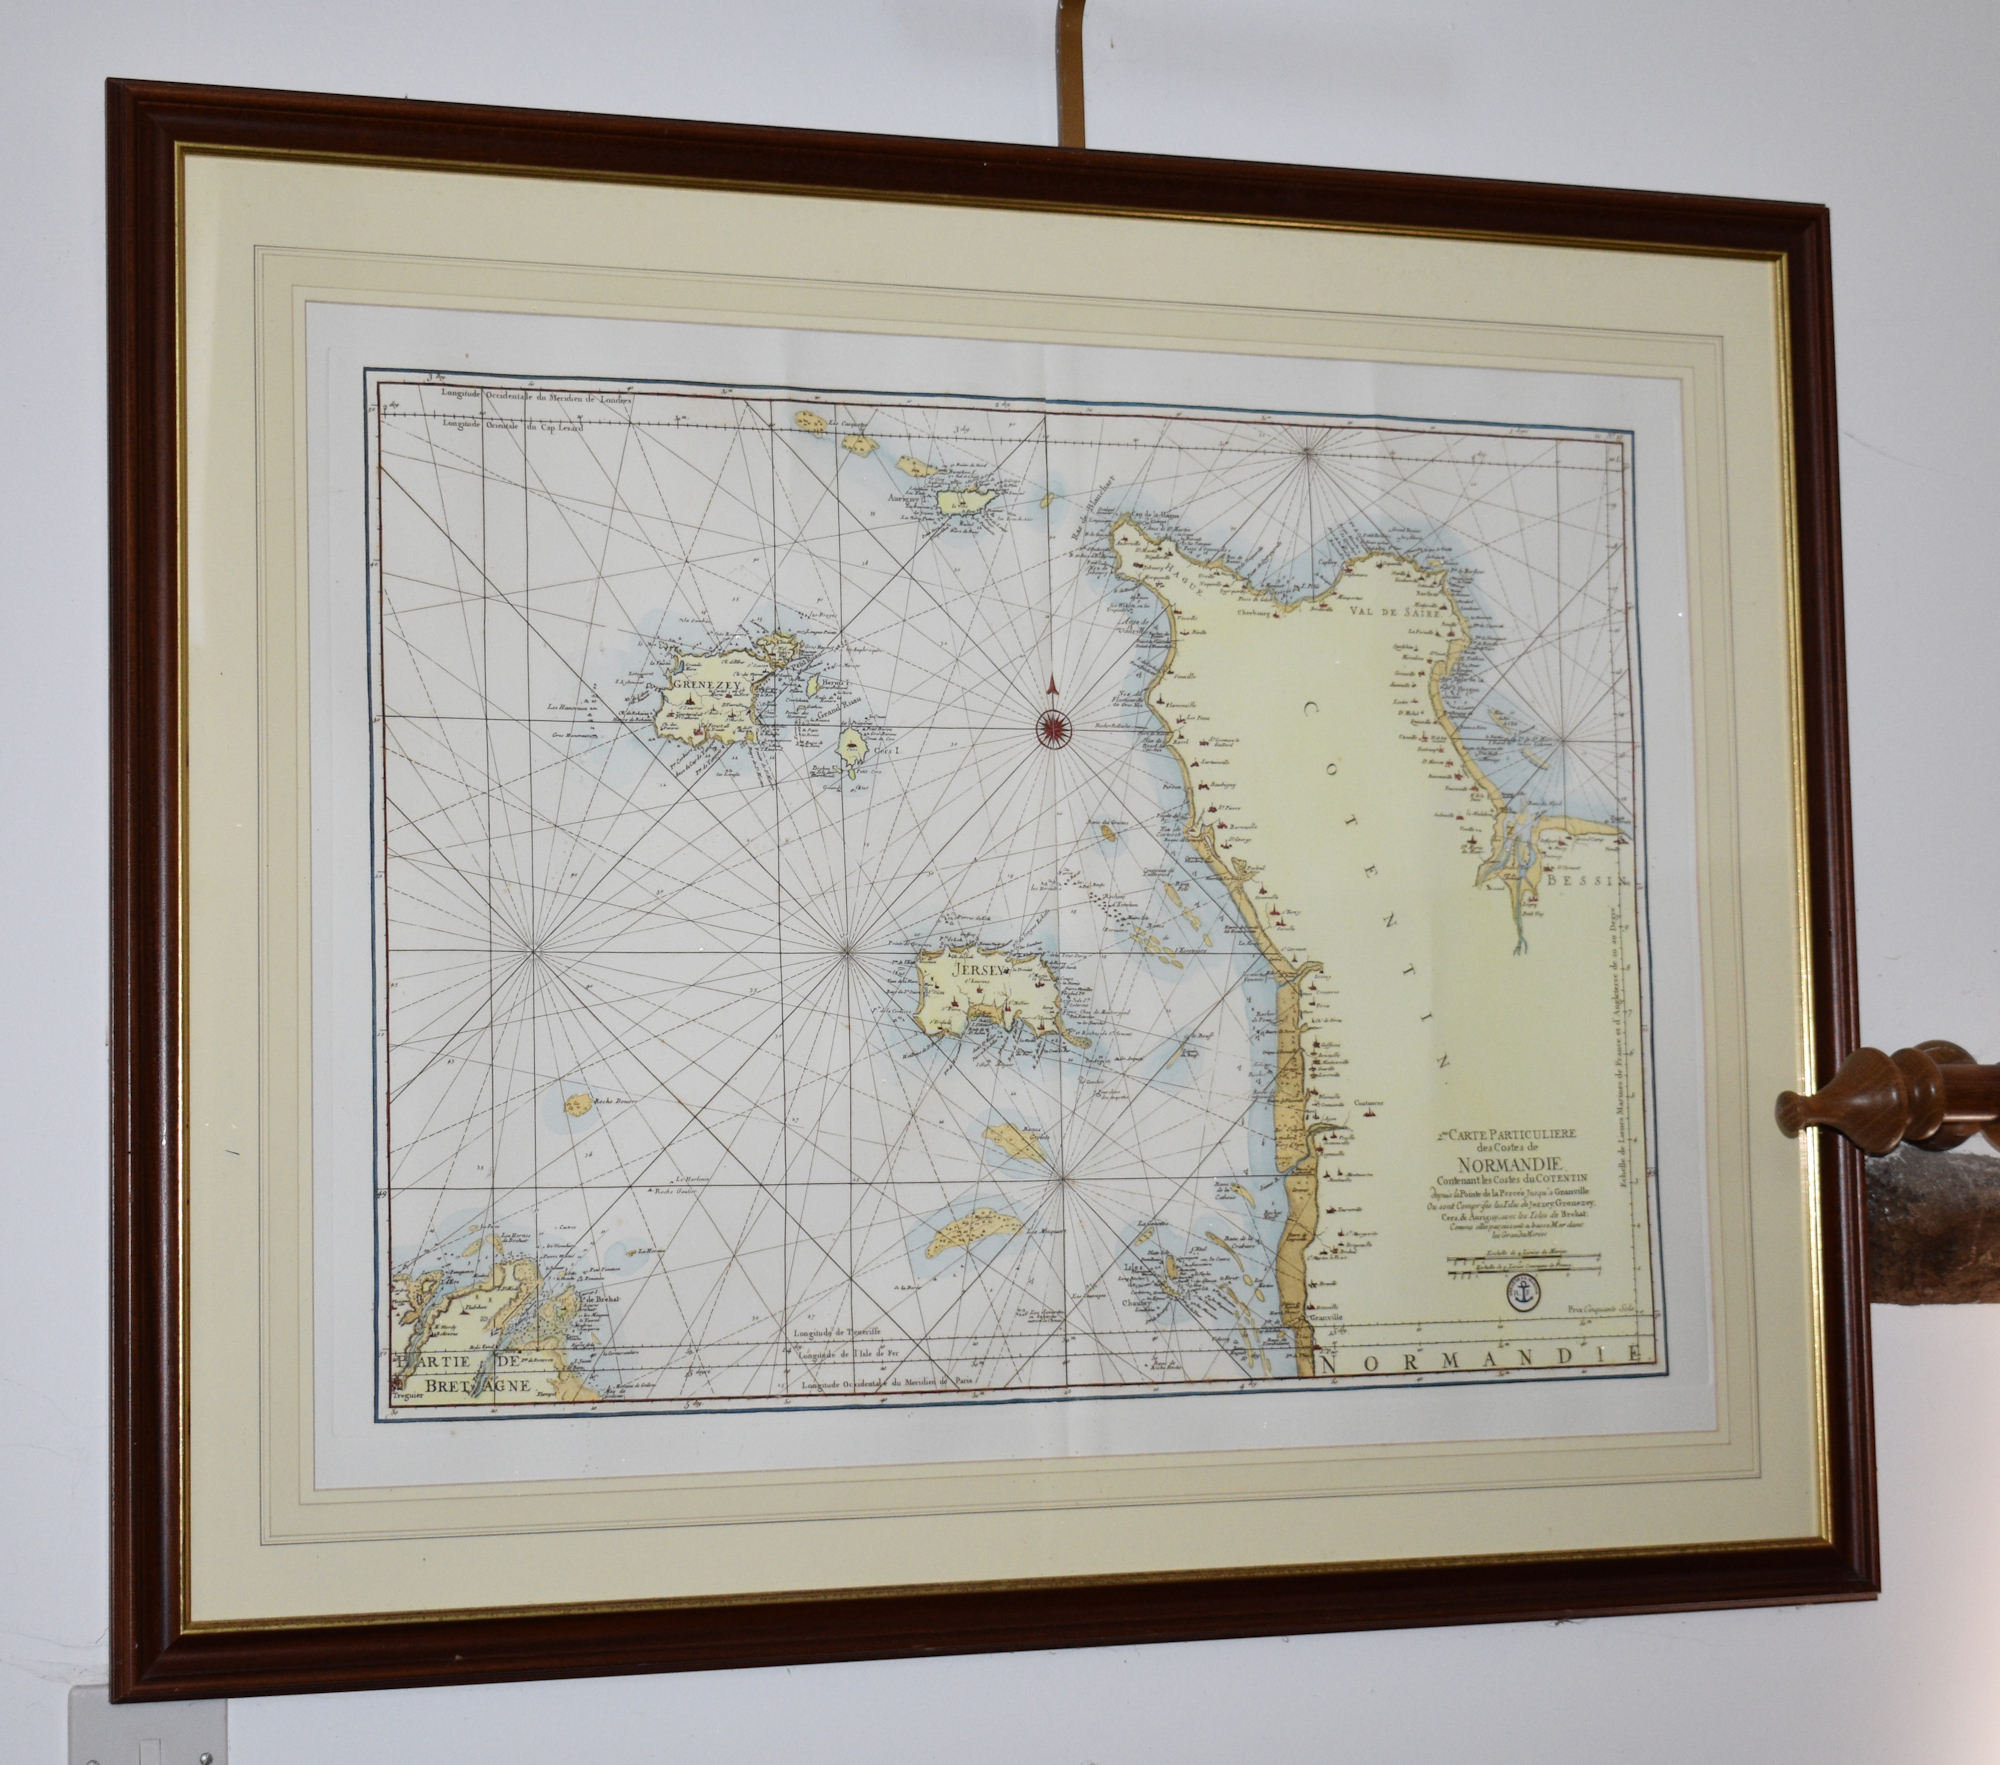 A reproduction coloured engraved chart of the Channel Islands and Normandy coast, '2me Carte